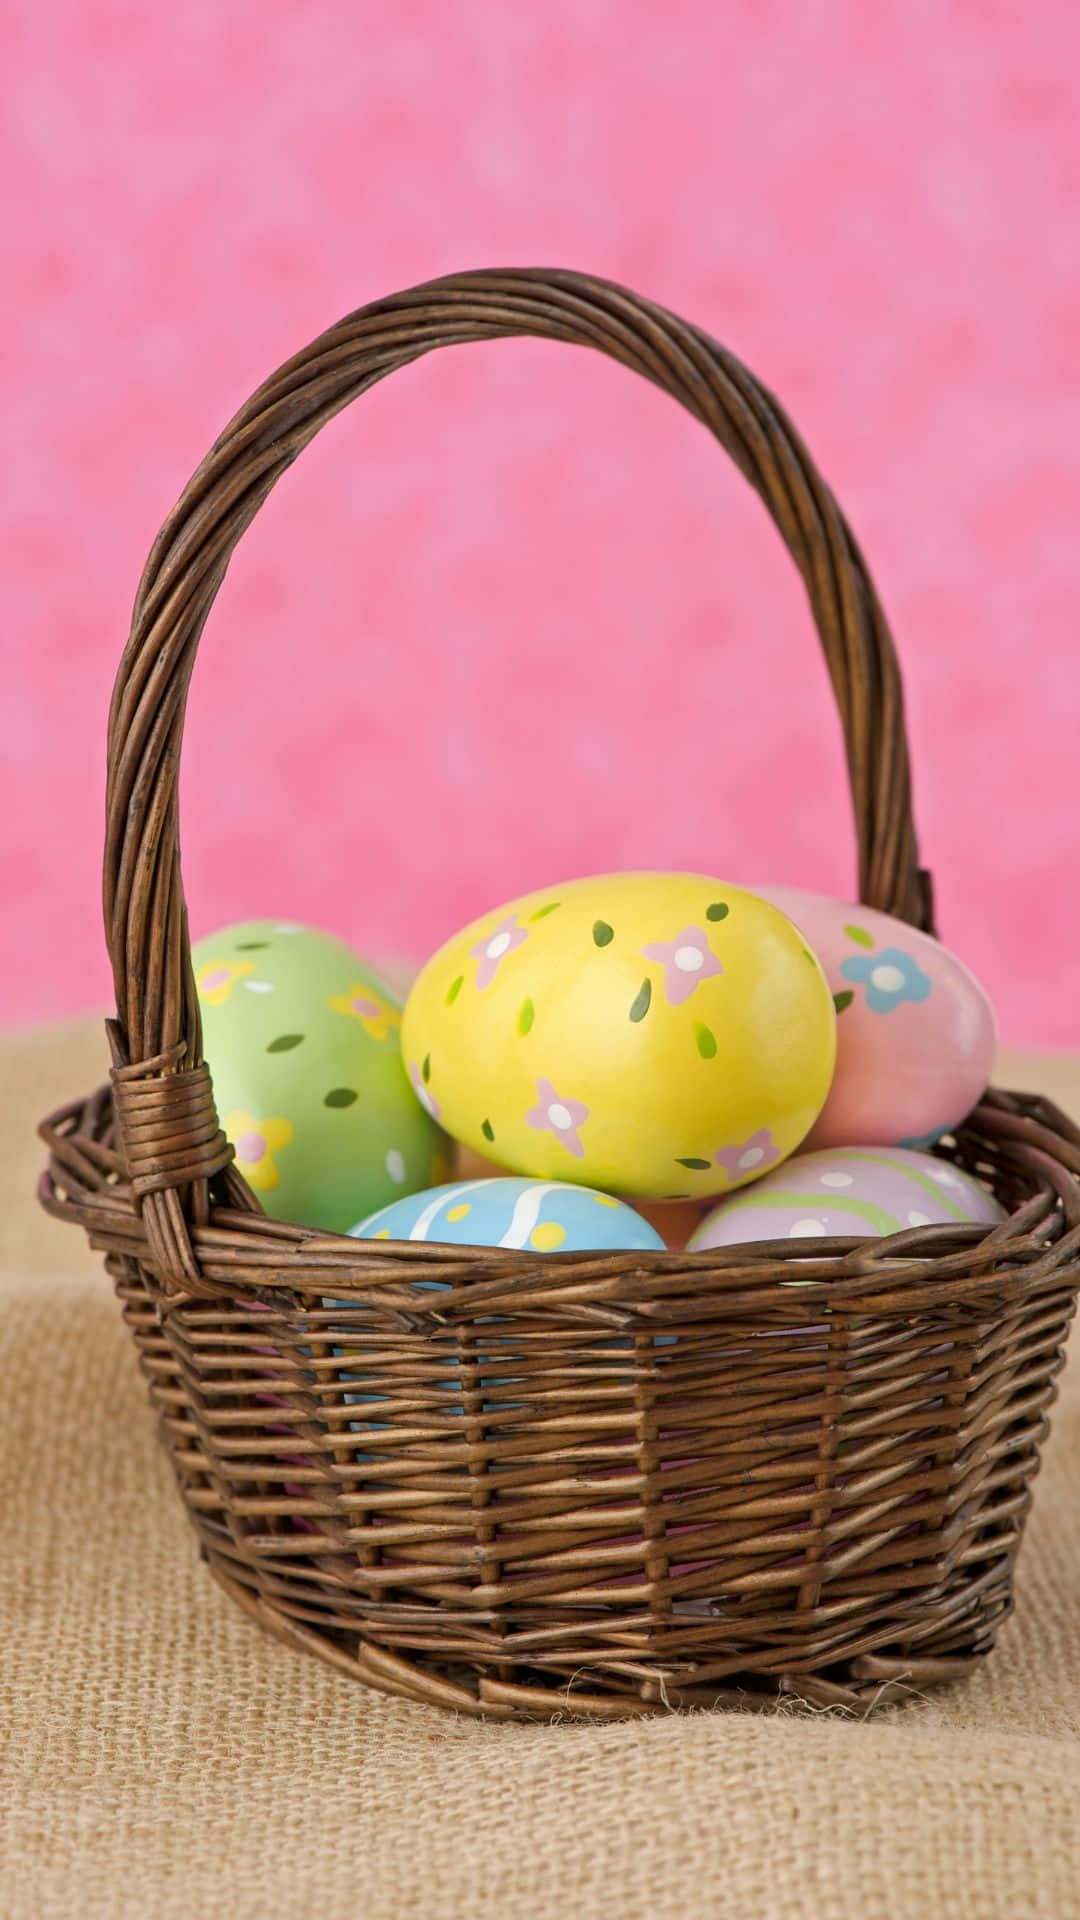 Celebrate Easter with a beautiful basket of treats! Wallpaper